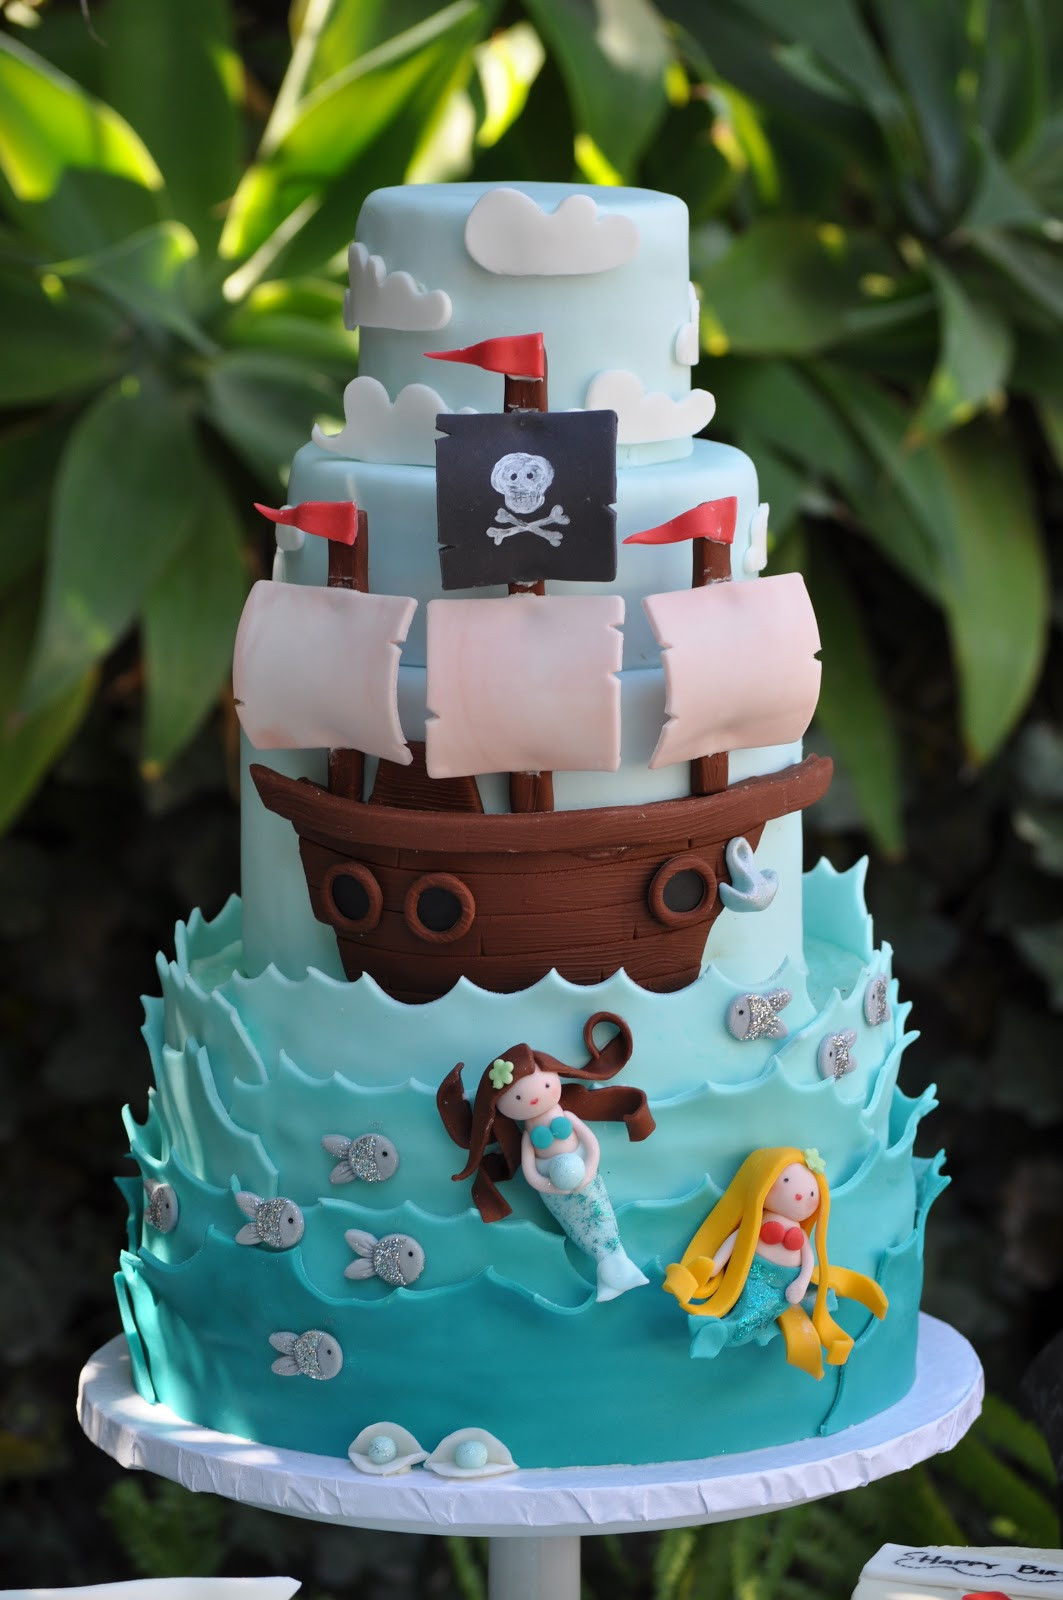 Mermaid Pirate Party Ideas
 A Pirate and Mermaid Party